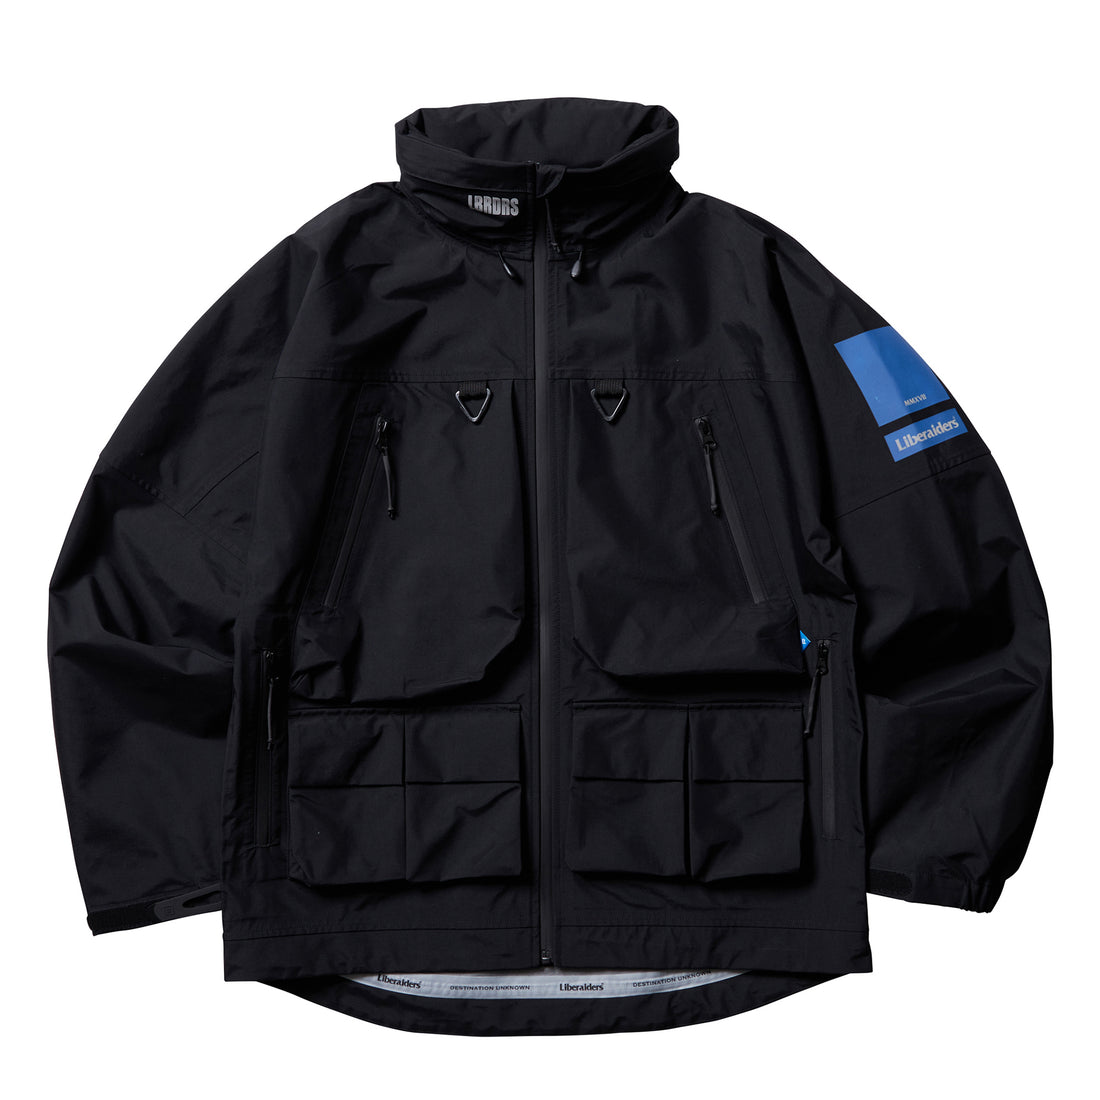 LIBERAIDERS - ALL CONDITIONS 3 LAYER JACKET - BLACK